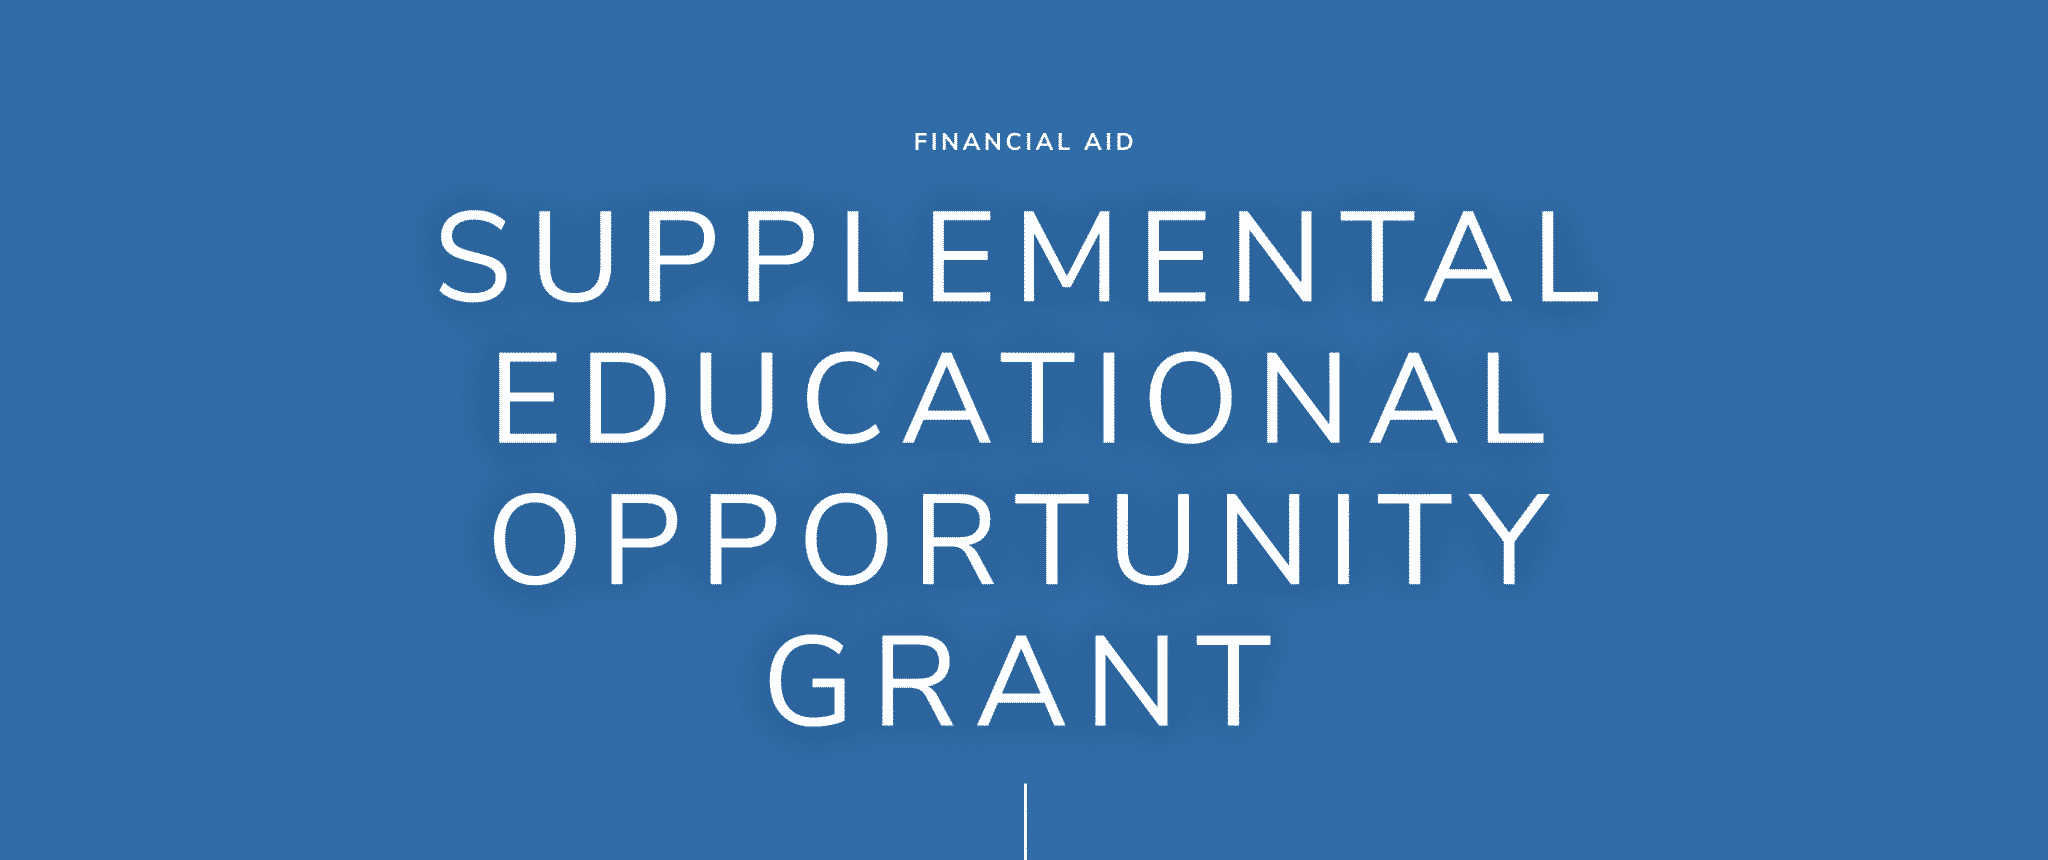 Federal SEOG Grant 2022 Eligibility, Amount and Application Update